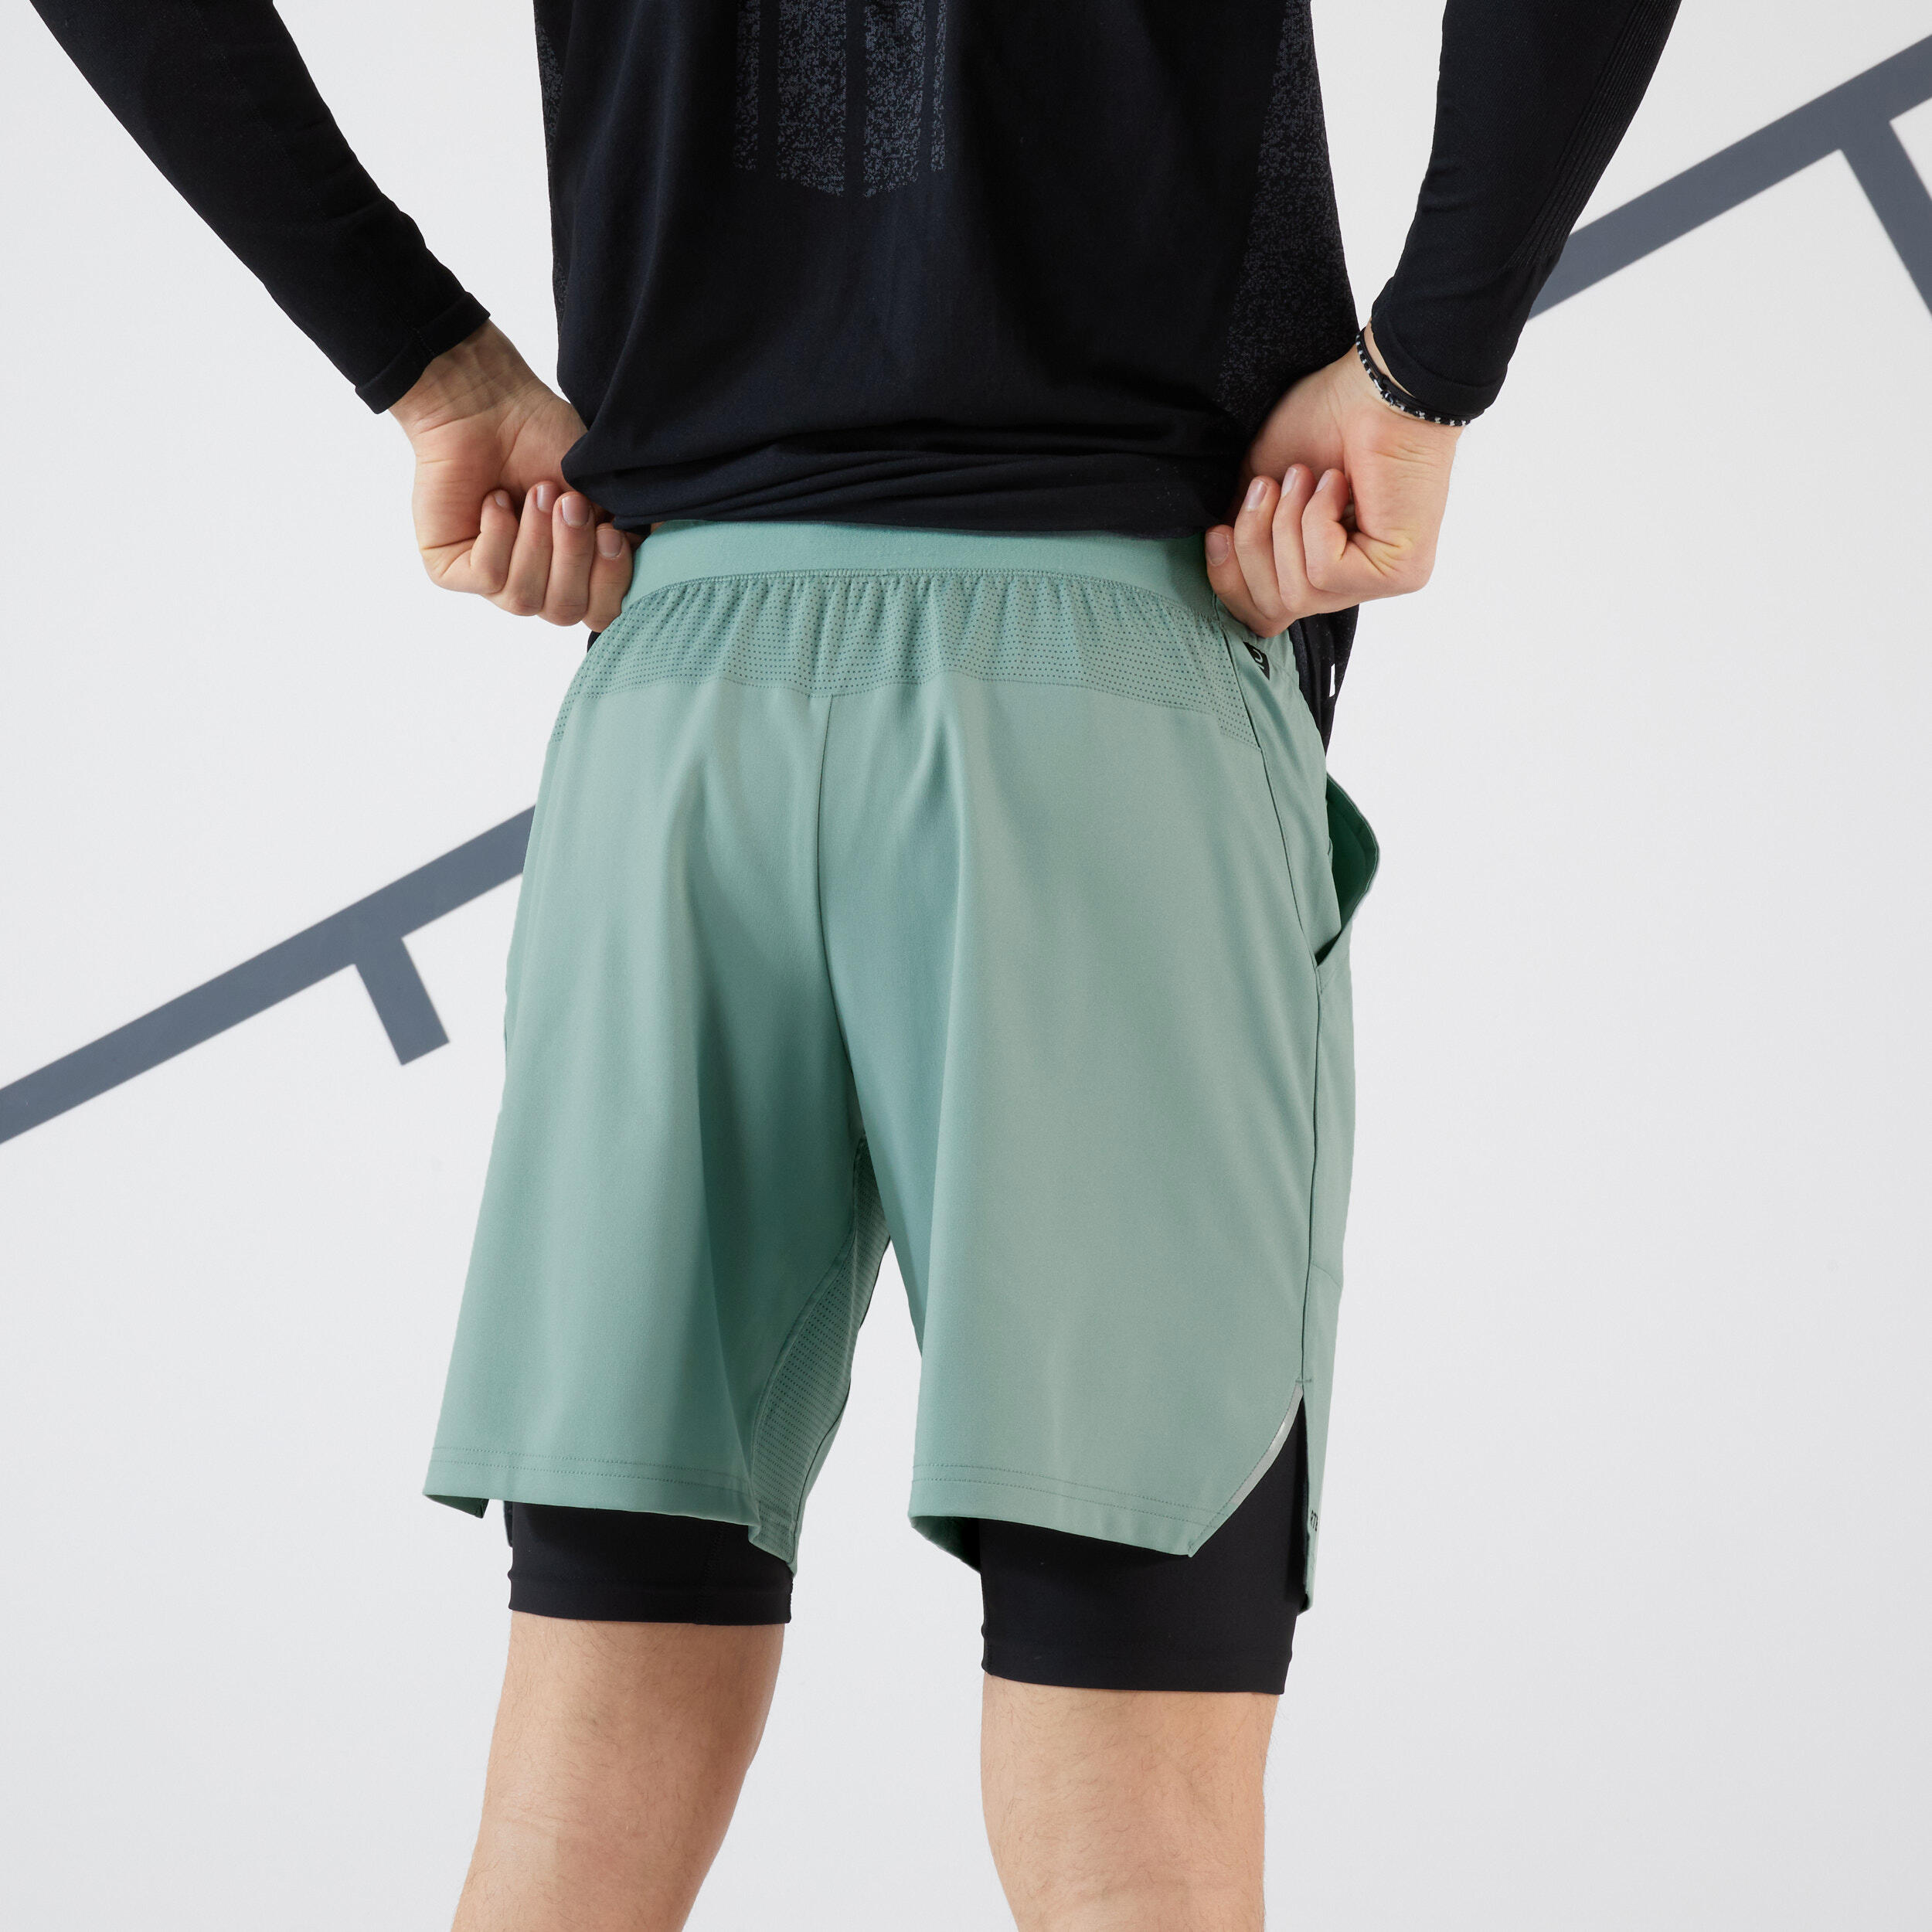 Men's Tennis 2-in-1 Shorts and Undershorts Thermic - Greyish Green/Black 3/7